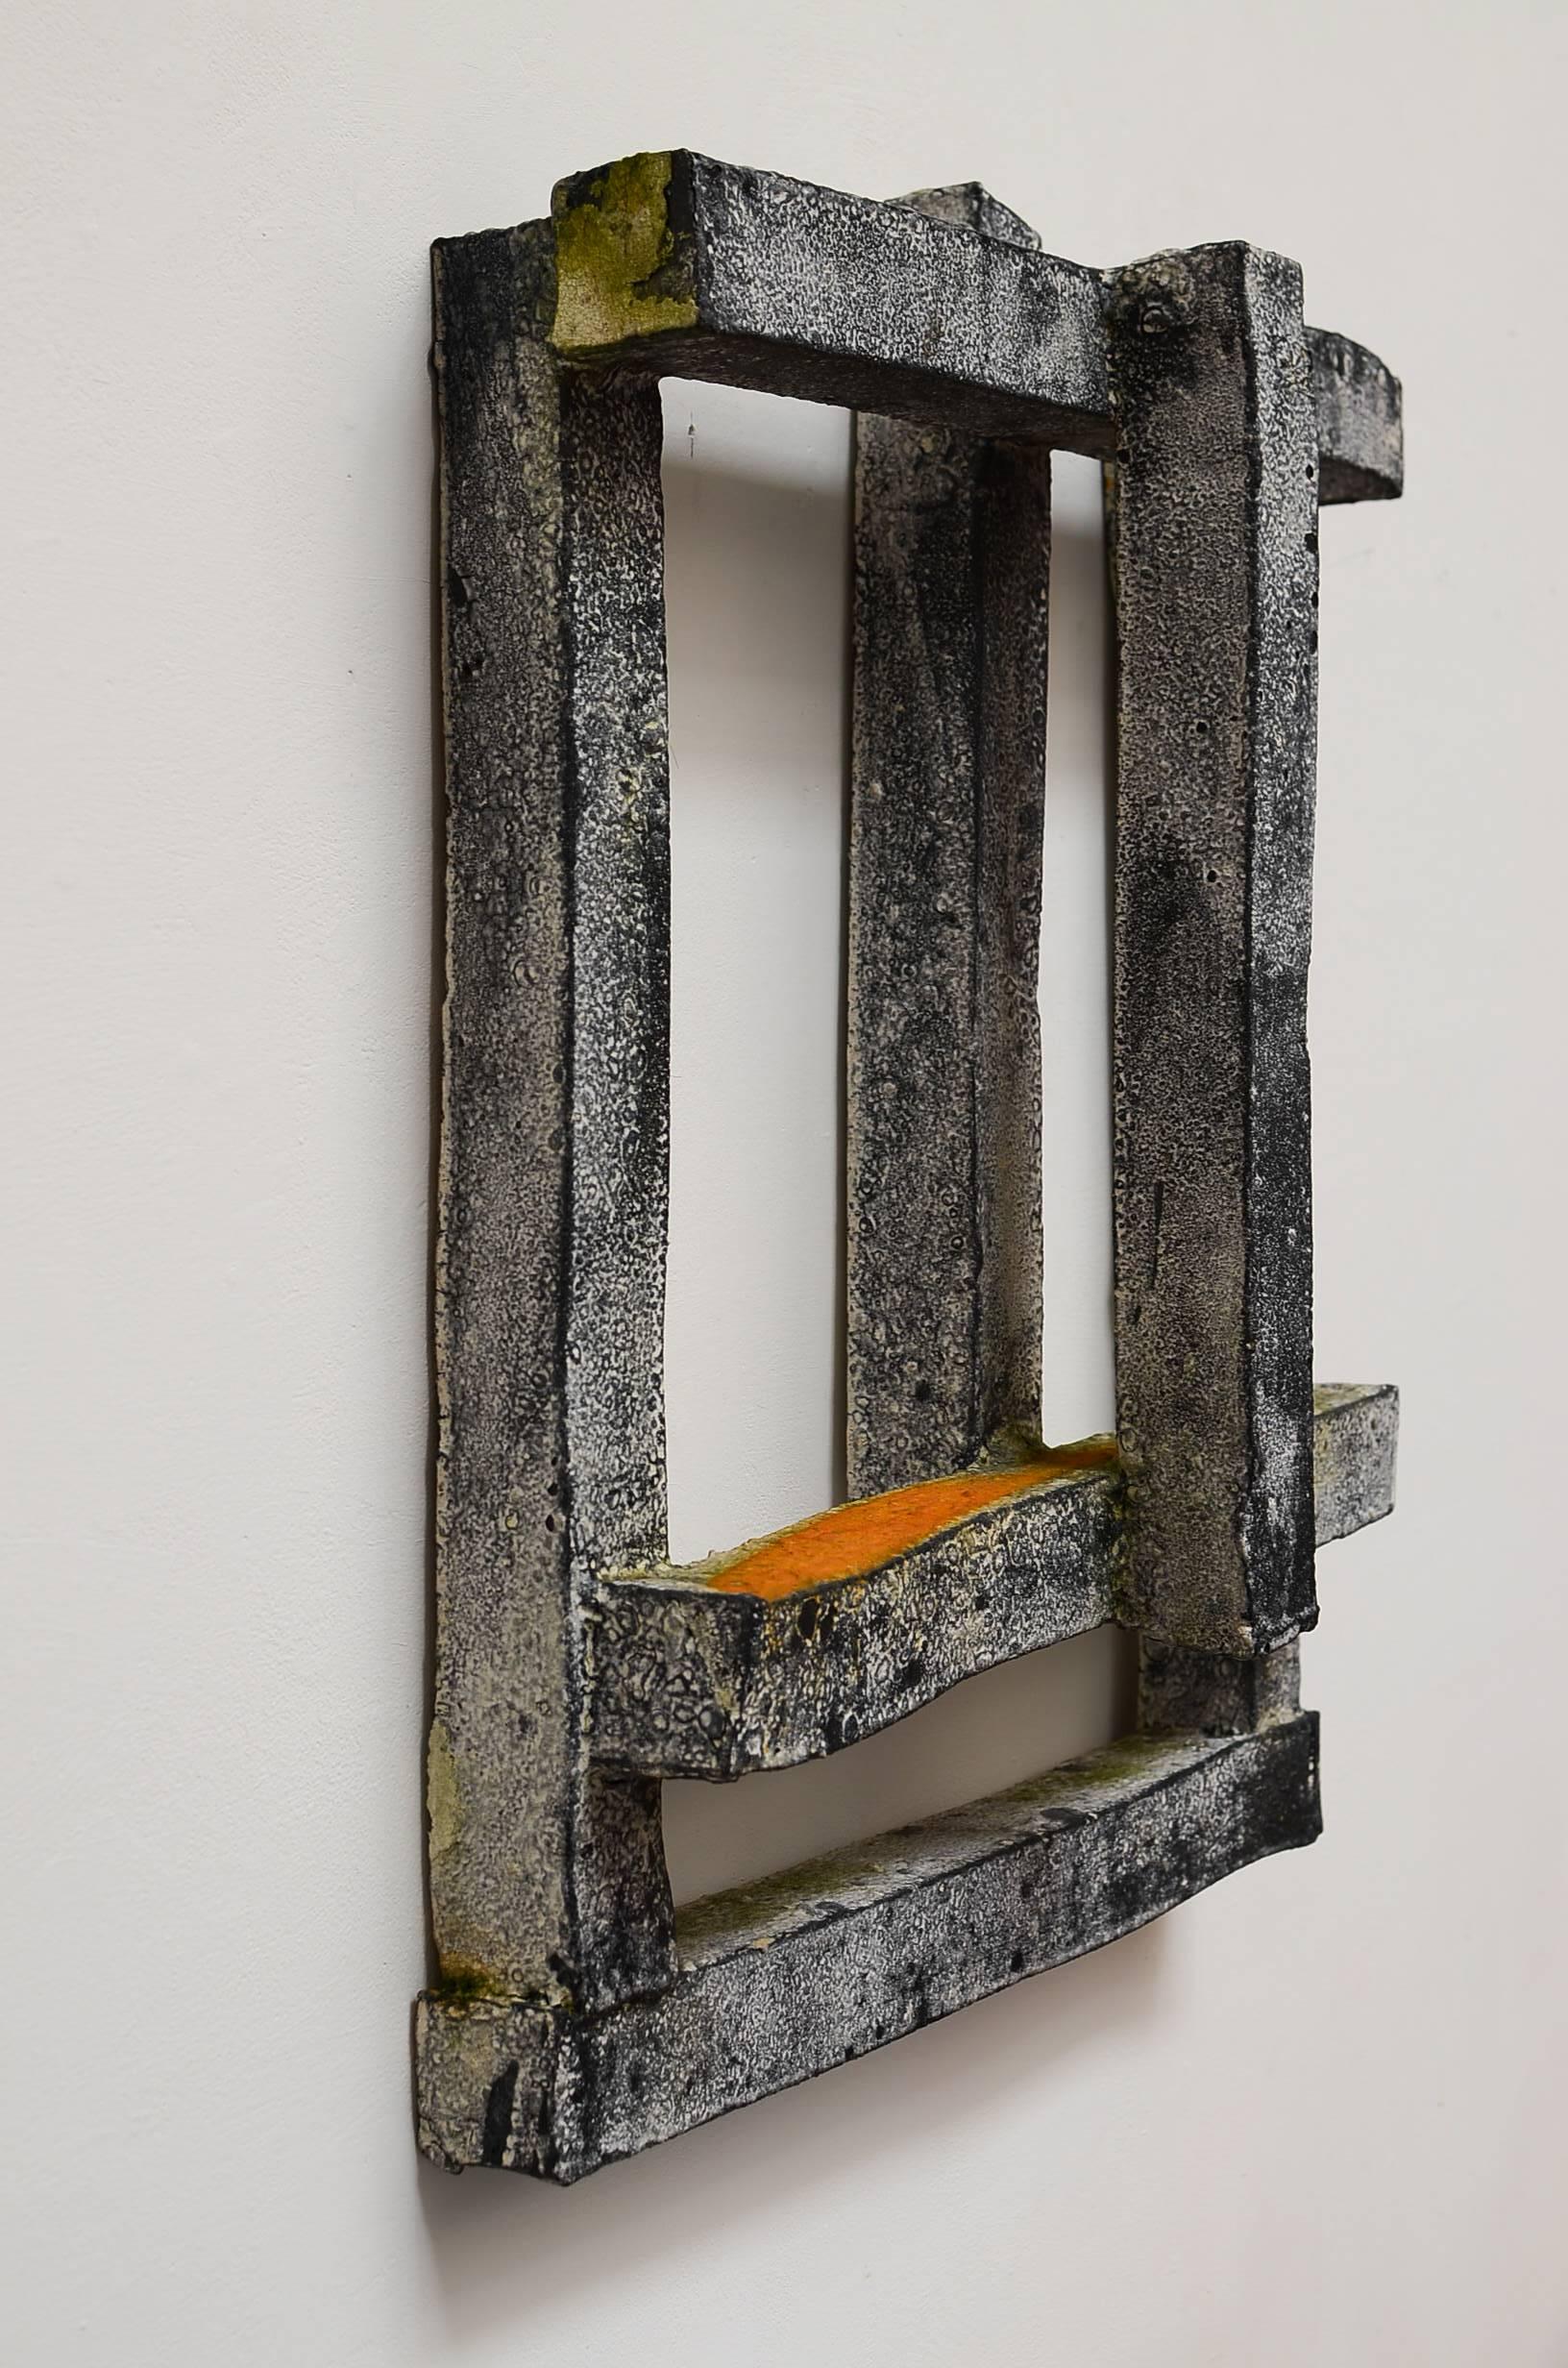 Robert Brady Untitled #56 Ceramic Wall Sculpture, 2005 In Excellent Condition For Sale In Berkeley, CA